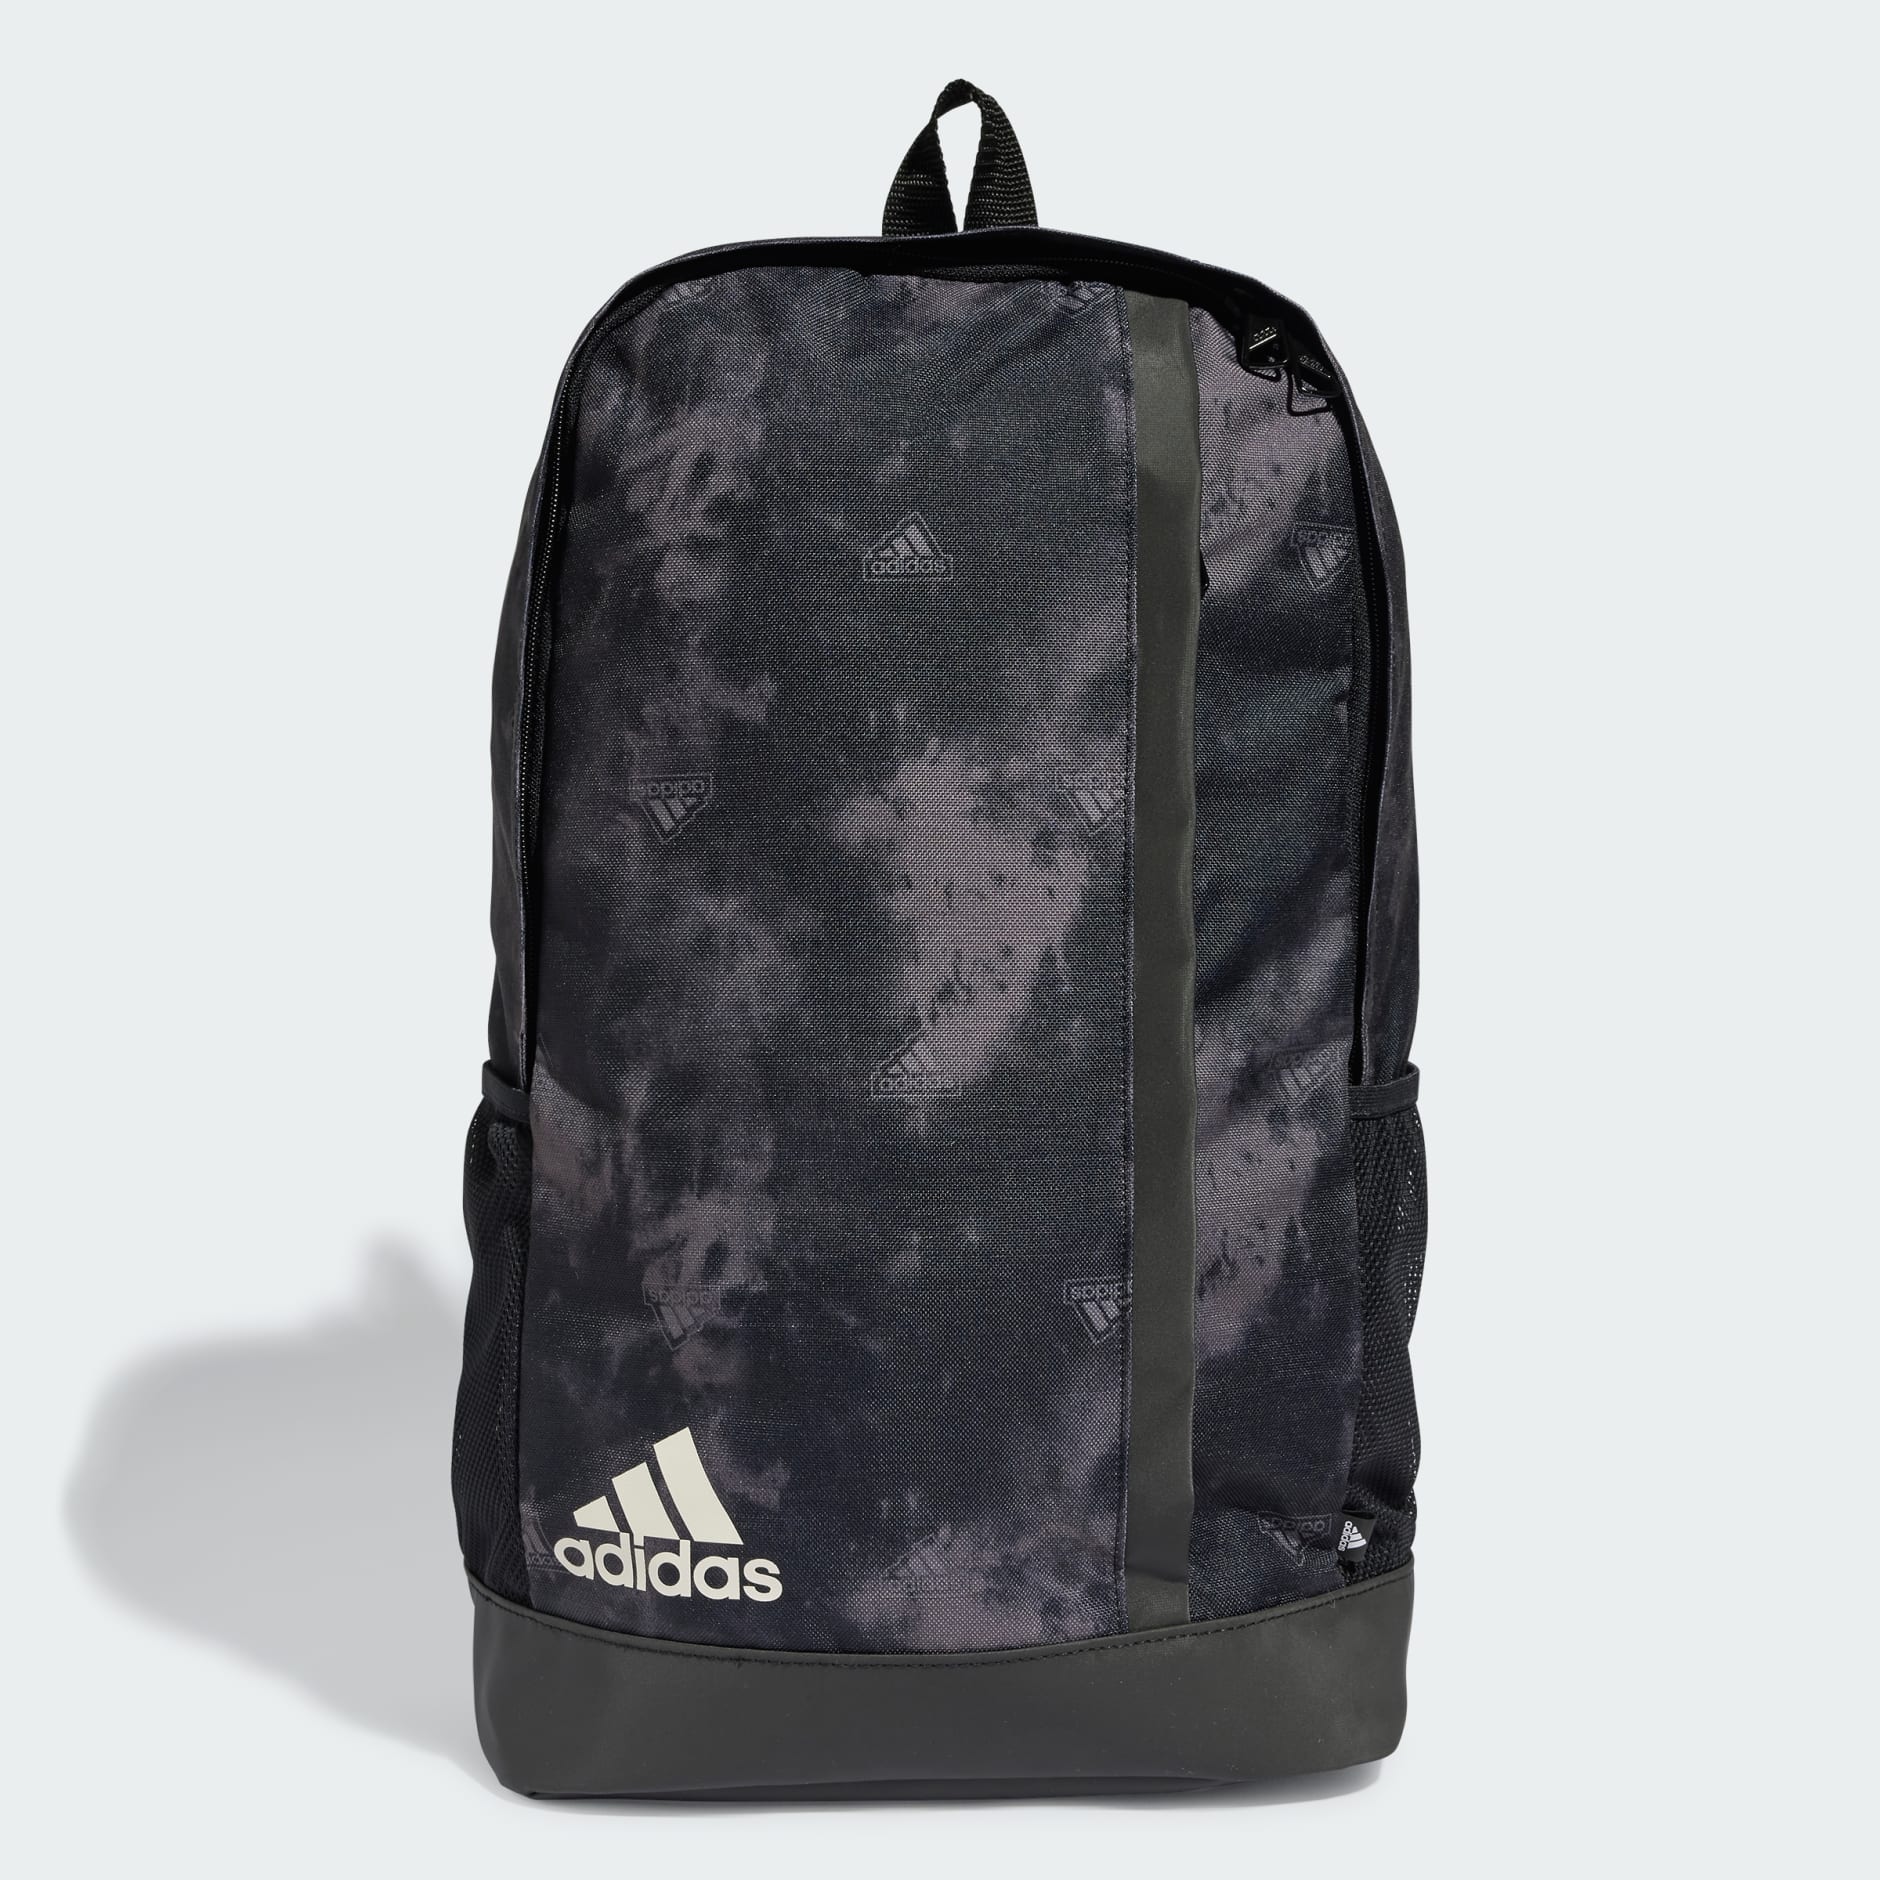 Accessories - Linear Graphic Backpack - Black | adidas South Africa